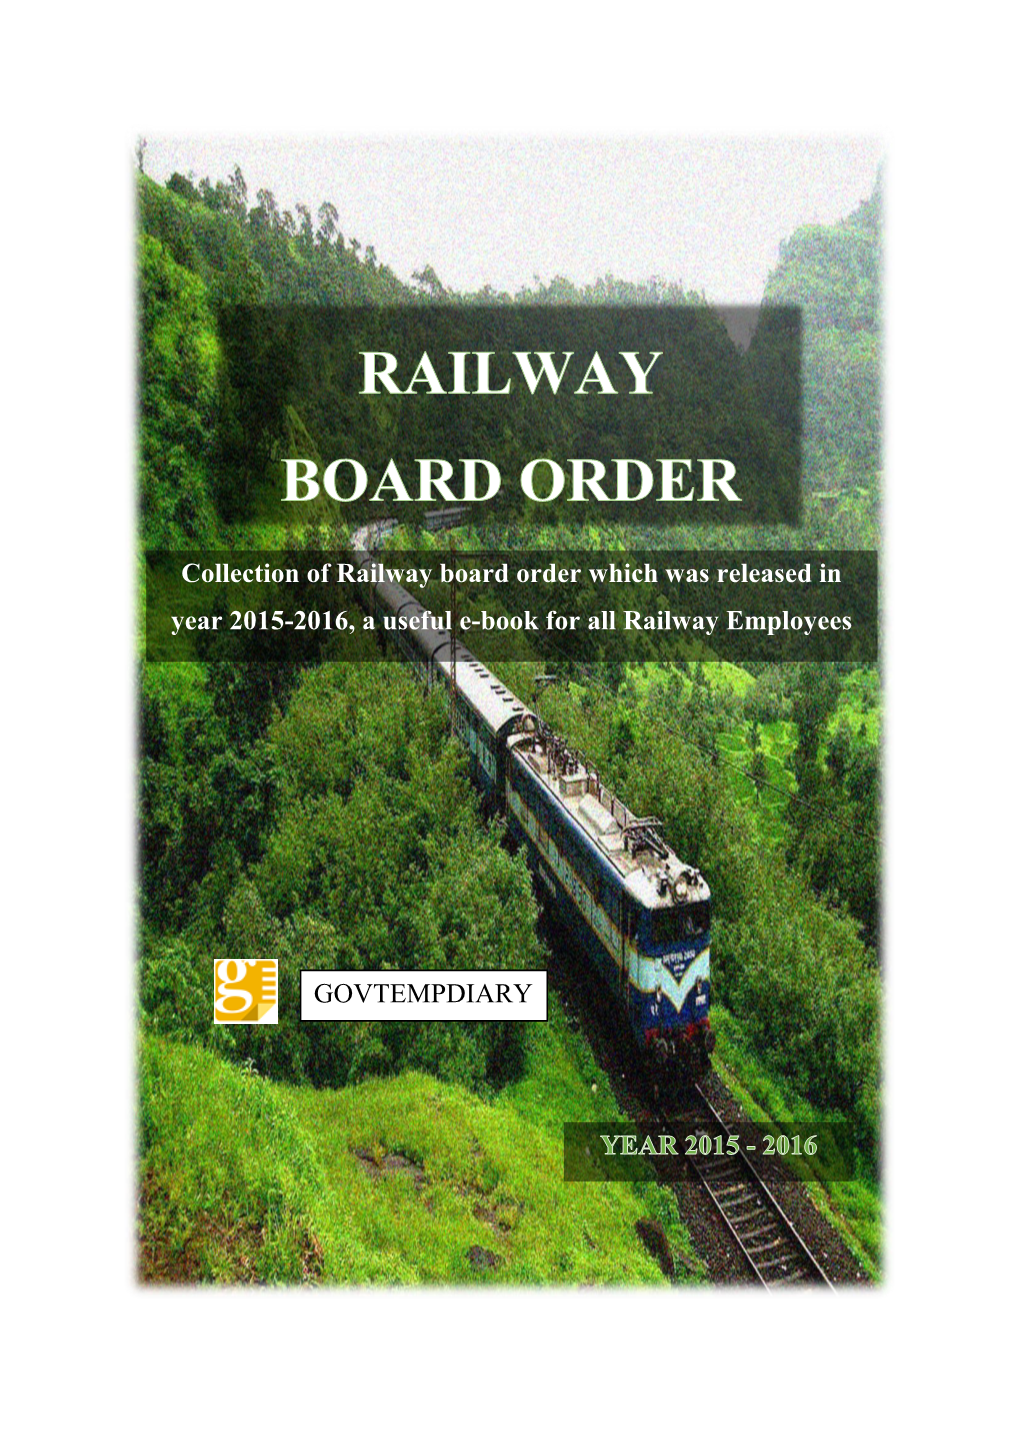 Collection of Railway Board Order Which Was Released in Year 2015-2016, a Useful E-Book for All Railway Employees